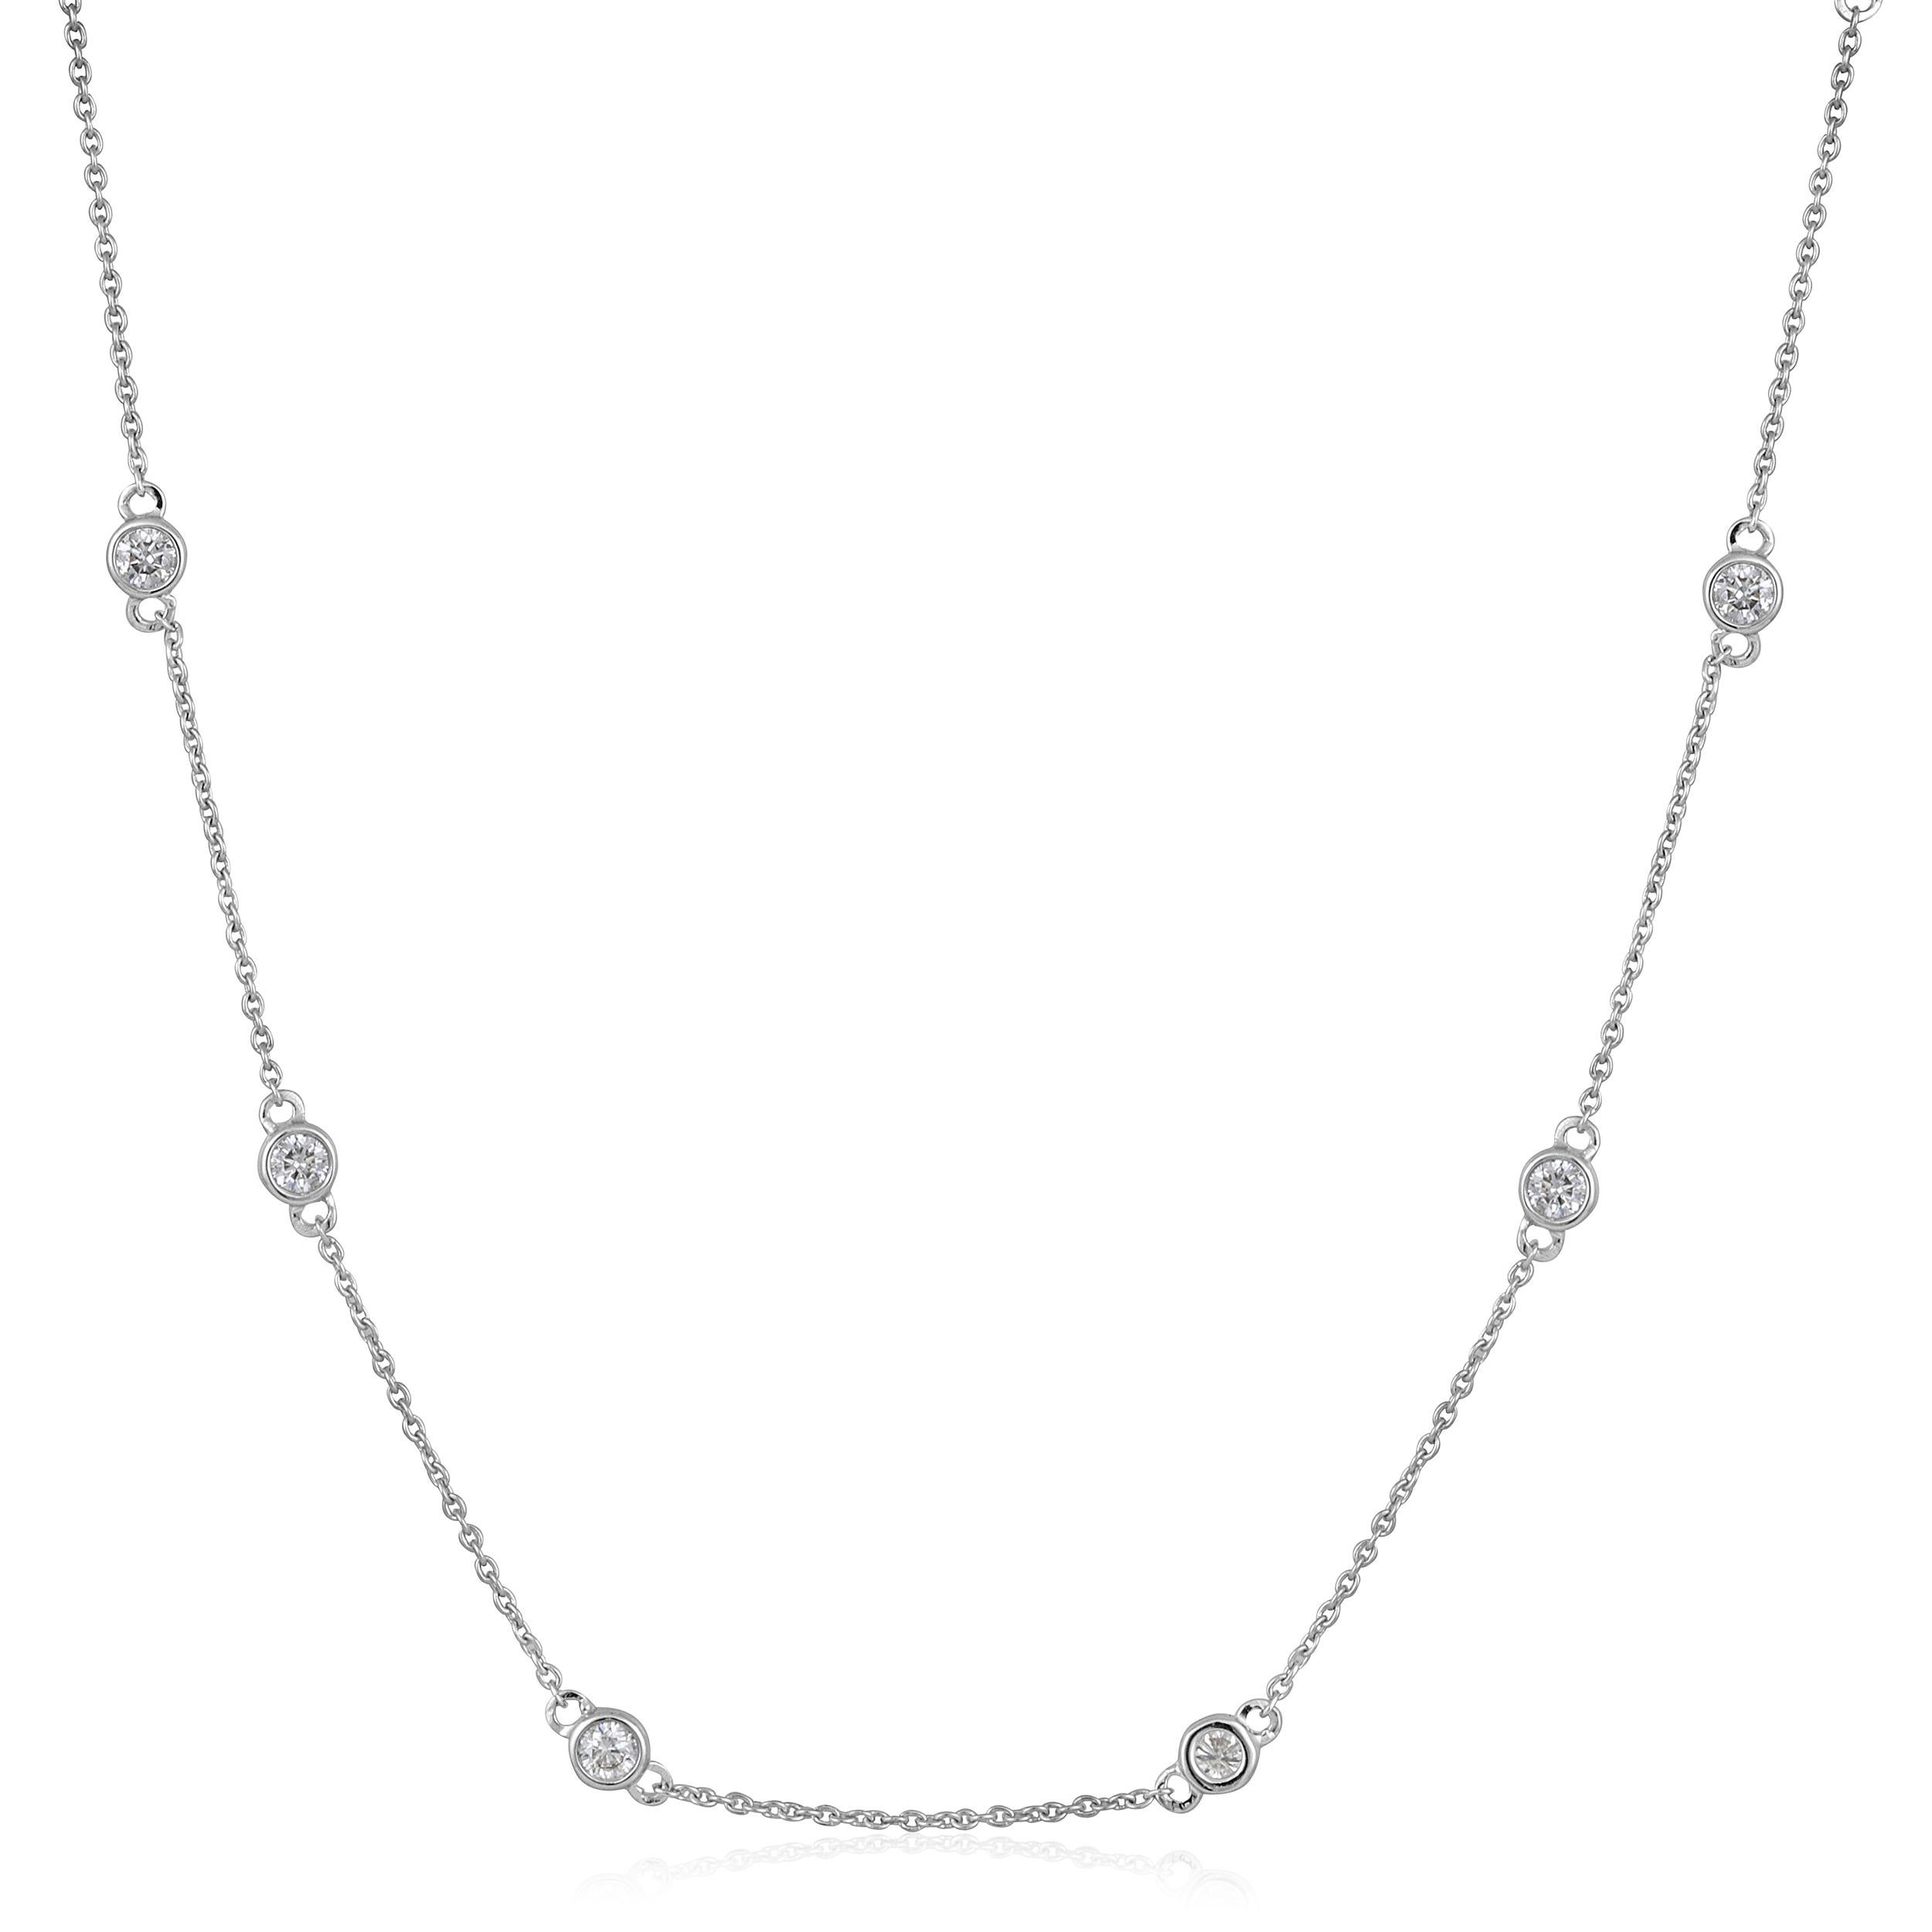 Crafted in 2.89 grams of 14K White Gold, the necklace contains 14 stones of Round Natural Diamonds with a total of 0.79 carat in F-G color and SI clarity. The necklace length is 18 inches.

CONTEMPORARY AND TIMELESS ESSENCE: Crafted in